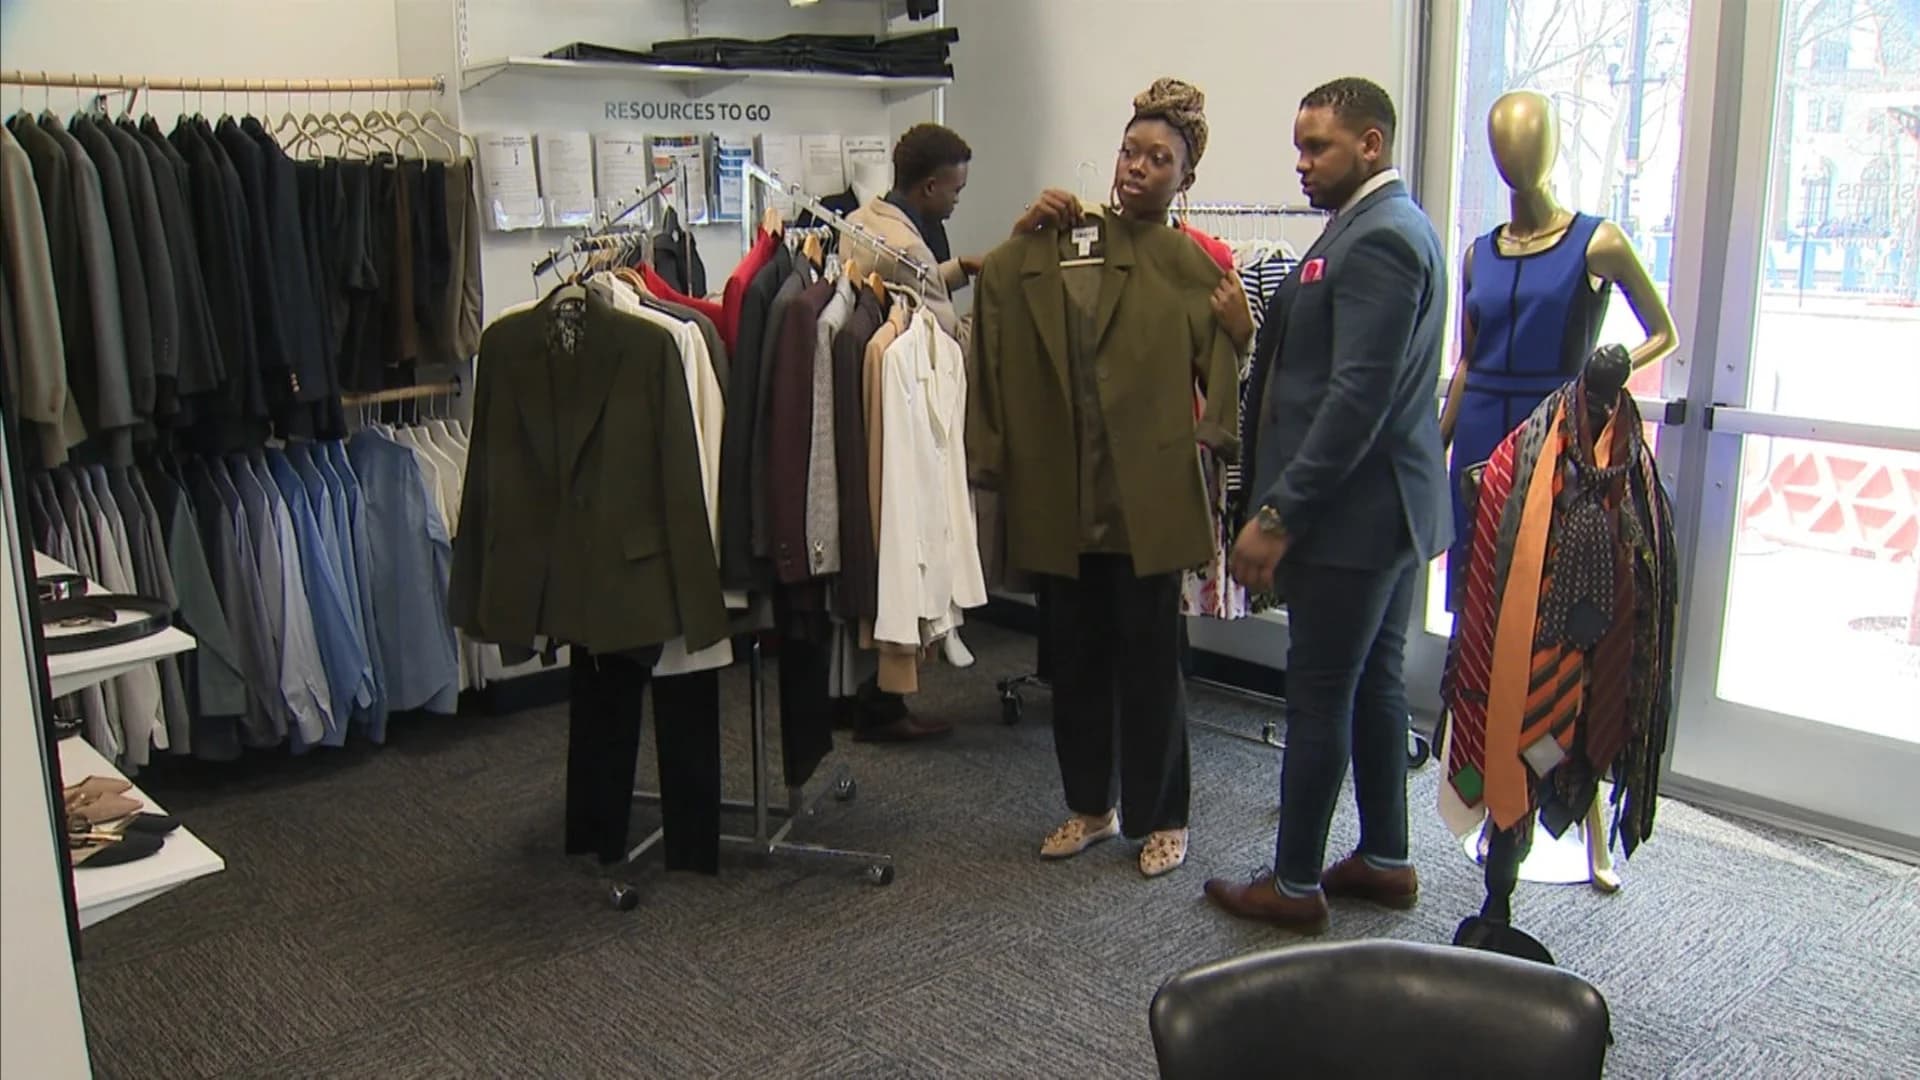 Dress for Success – Berkeley College holds Career Clothing Boutique for students